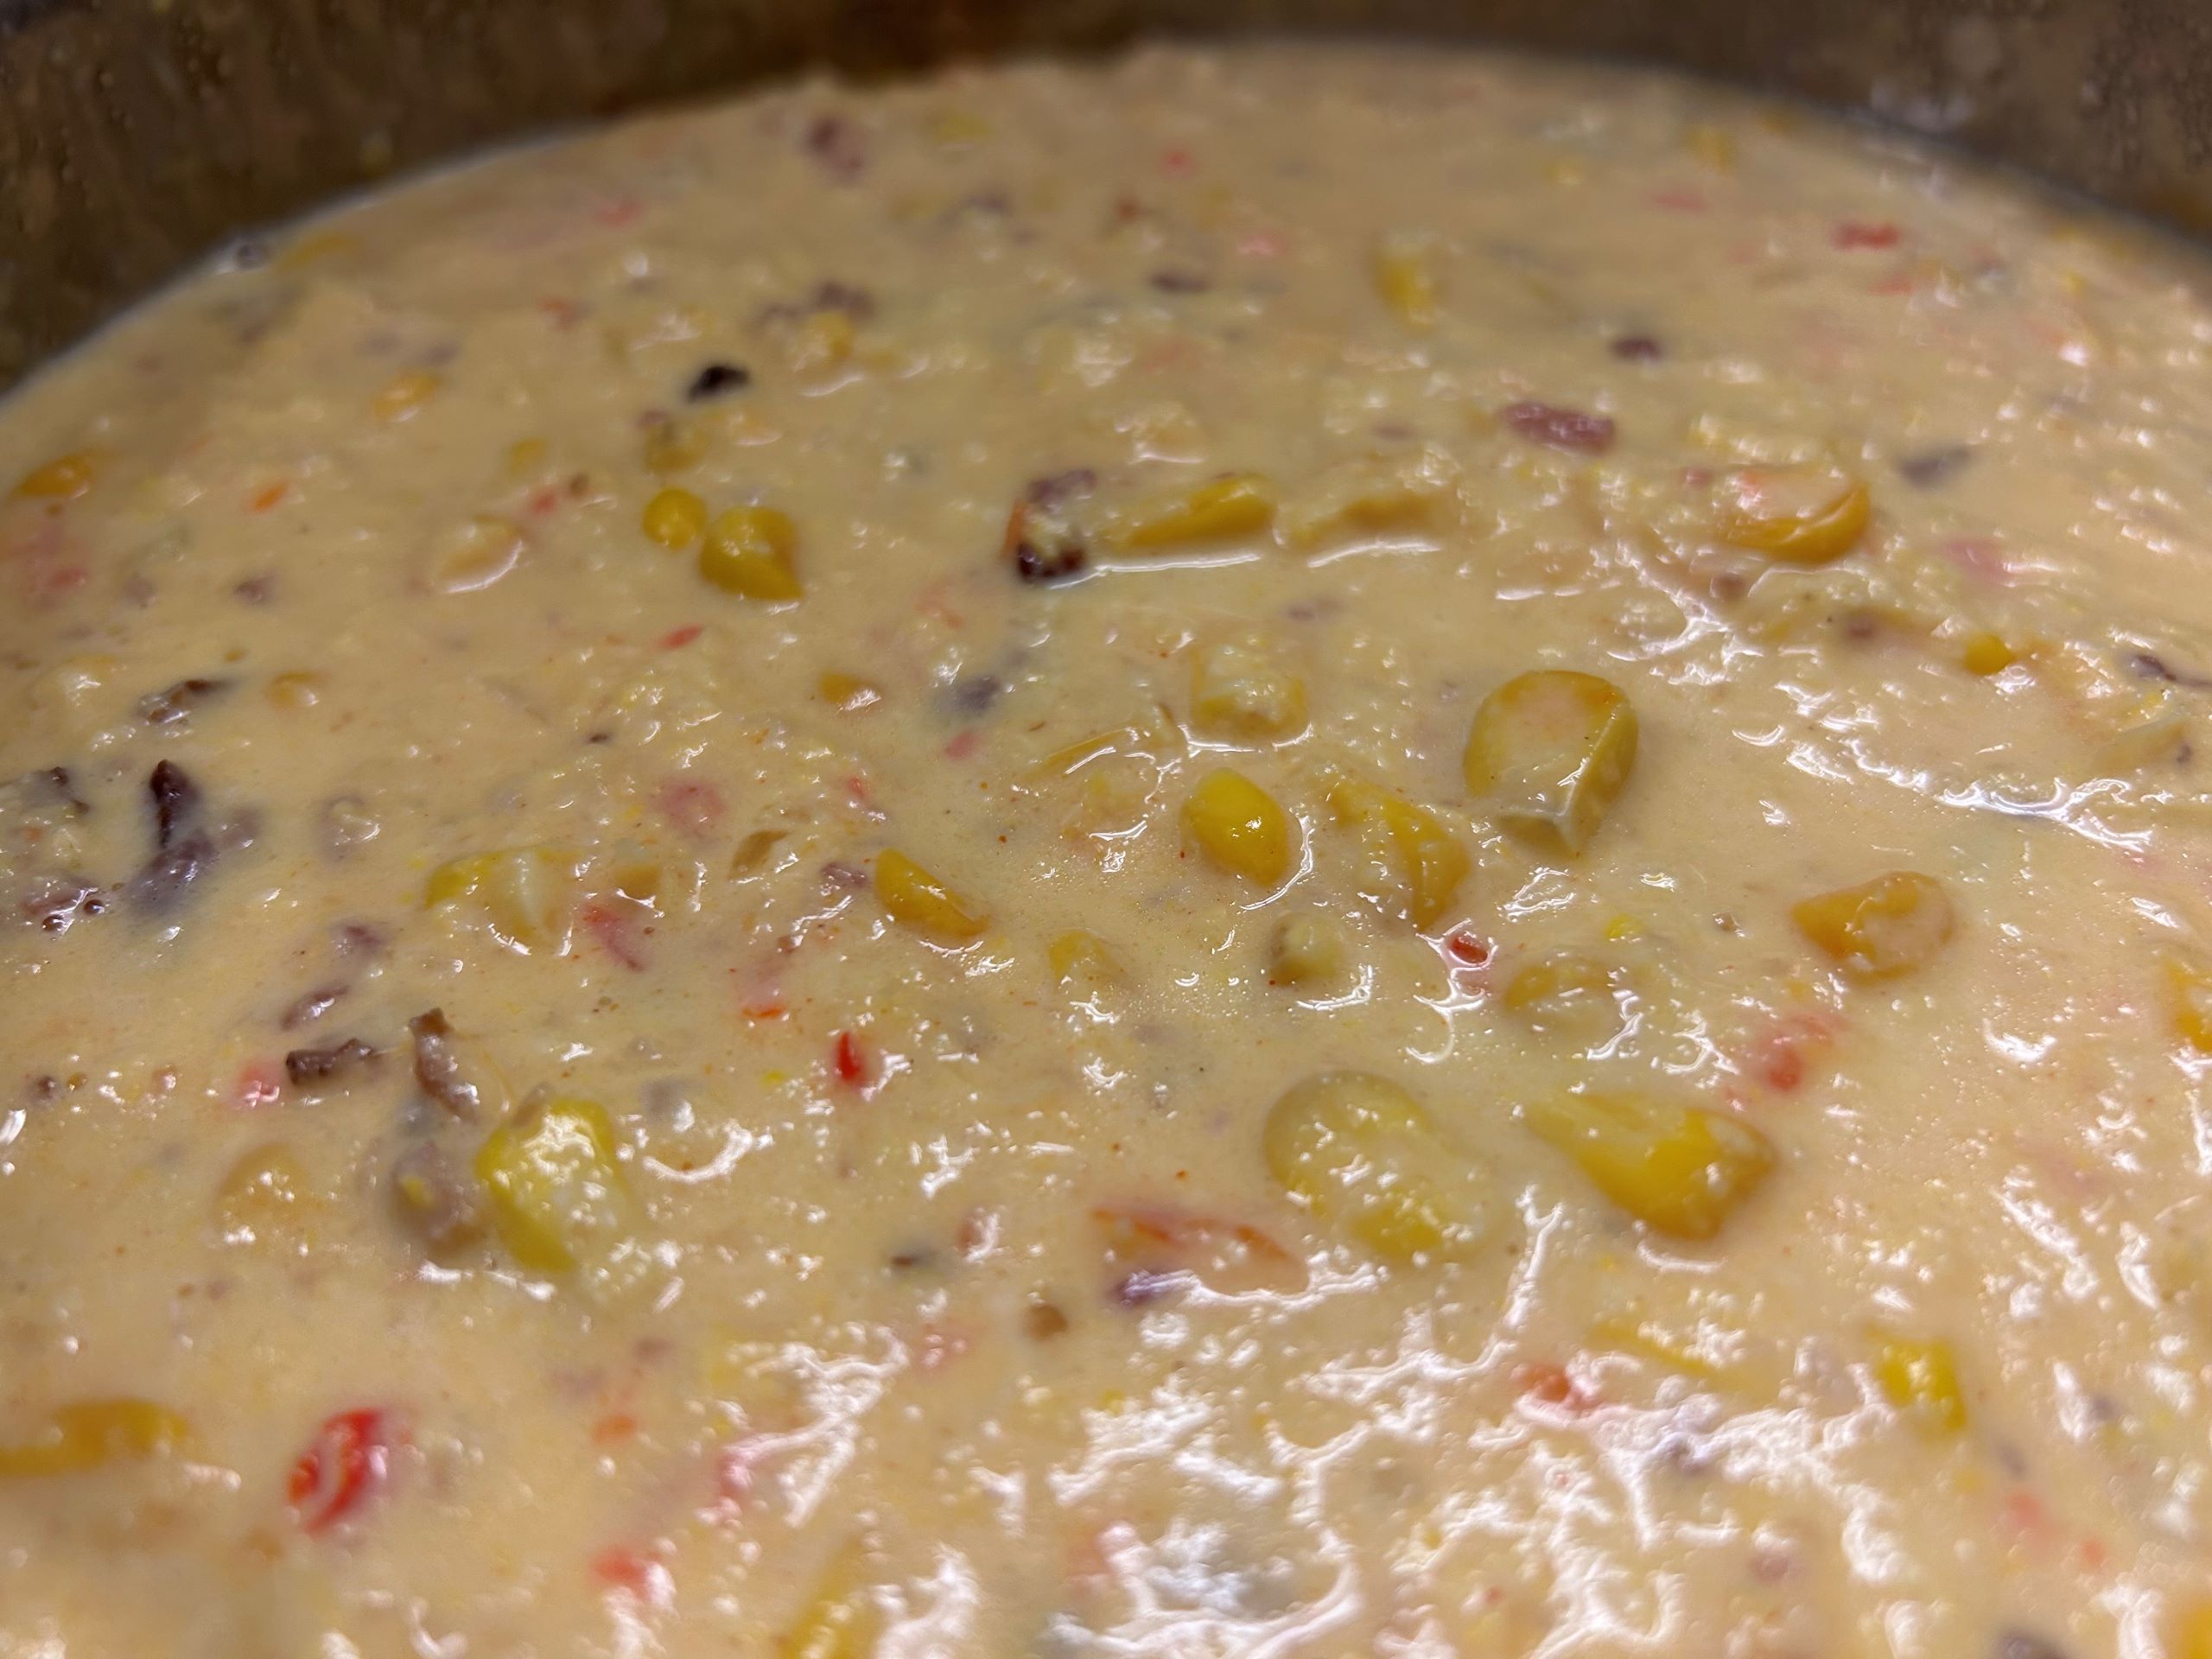 Kat's Creamy Bacon Corn Chowder Soup still in the pot with visible sweet corn pieces, thin sliced vegetables, in a steel pot, close up.